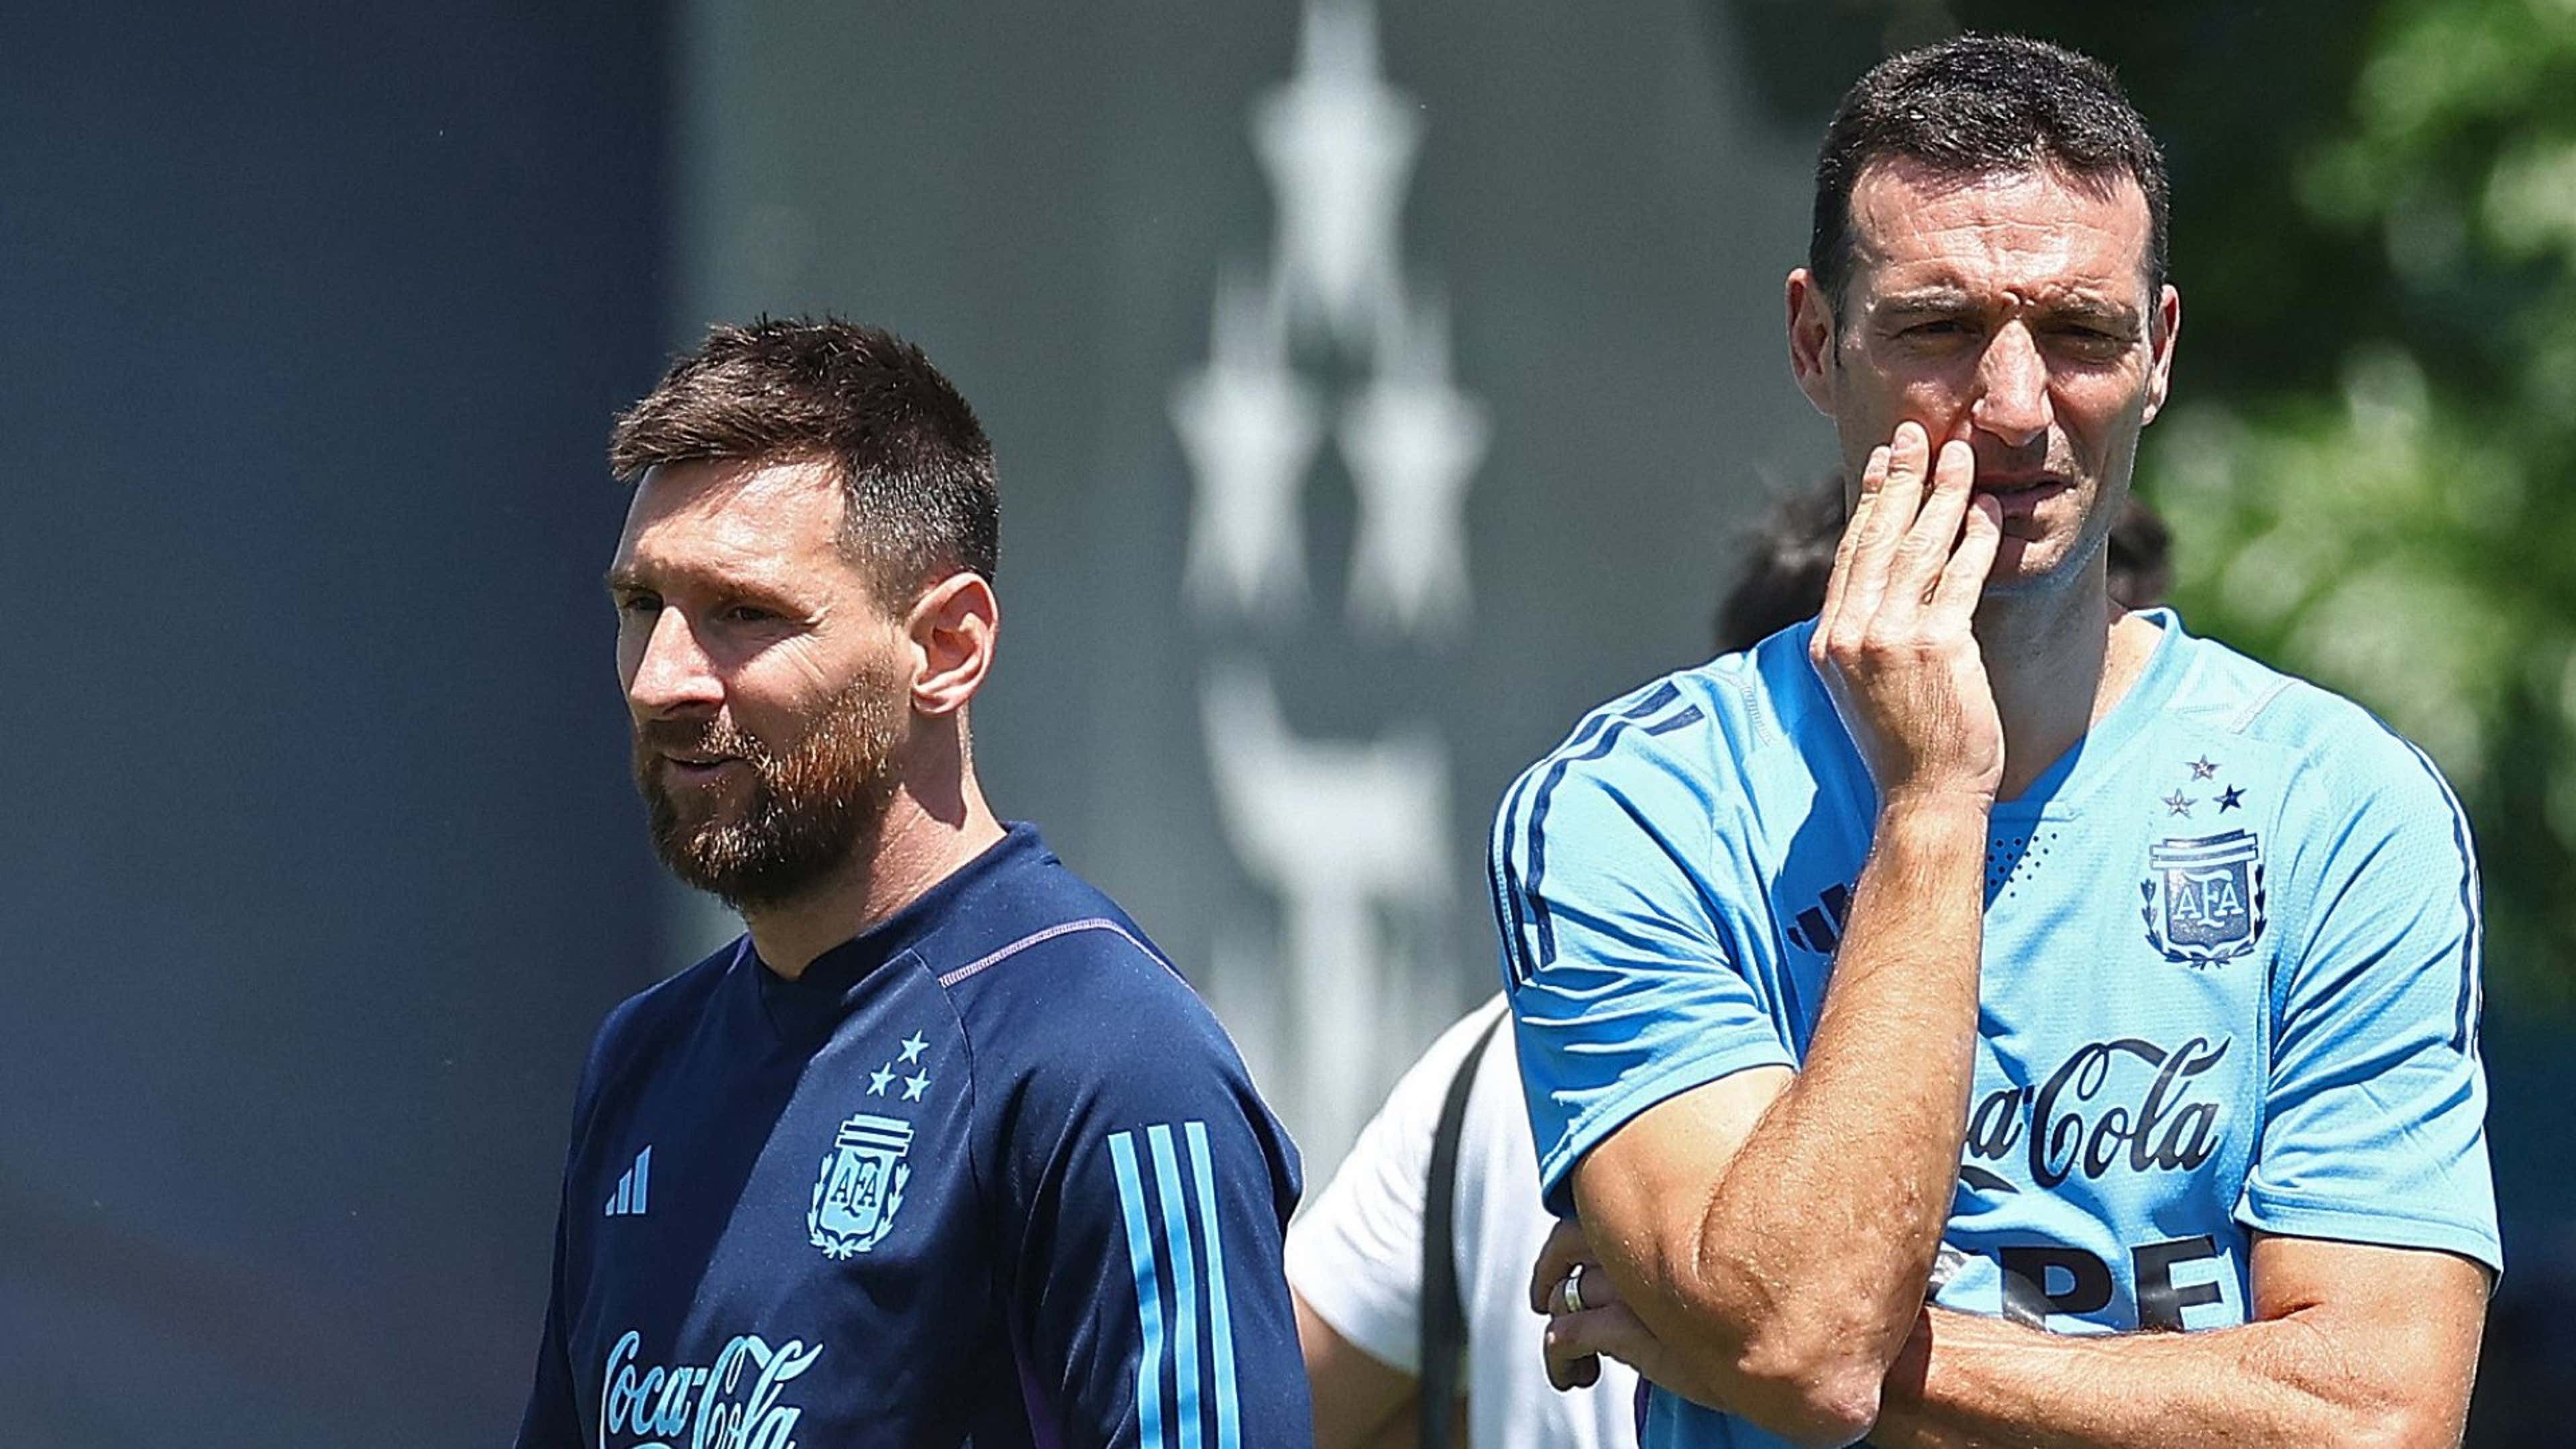 Argentina Head Coach Clashes With Messi After Defeat To Uruguay